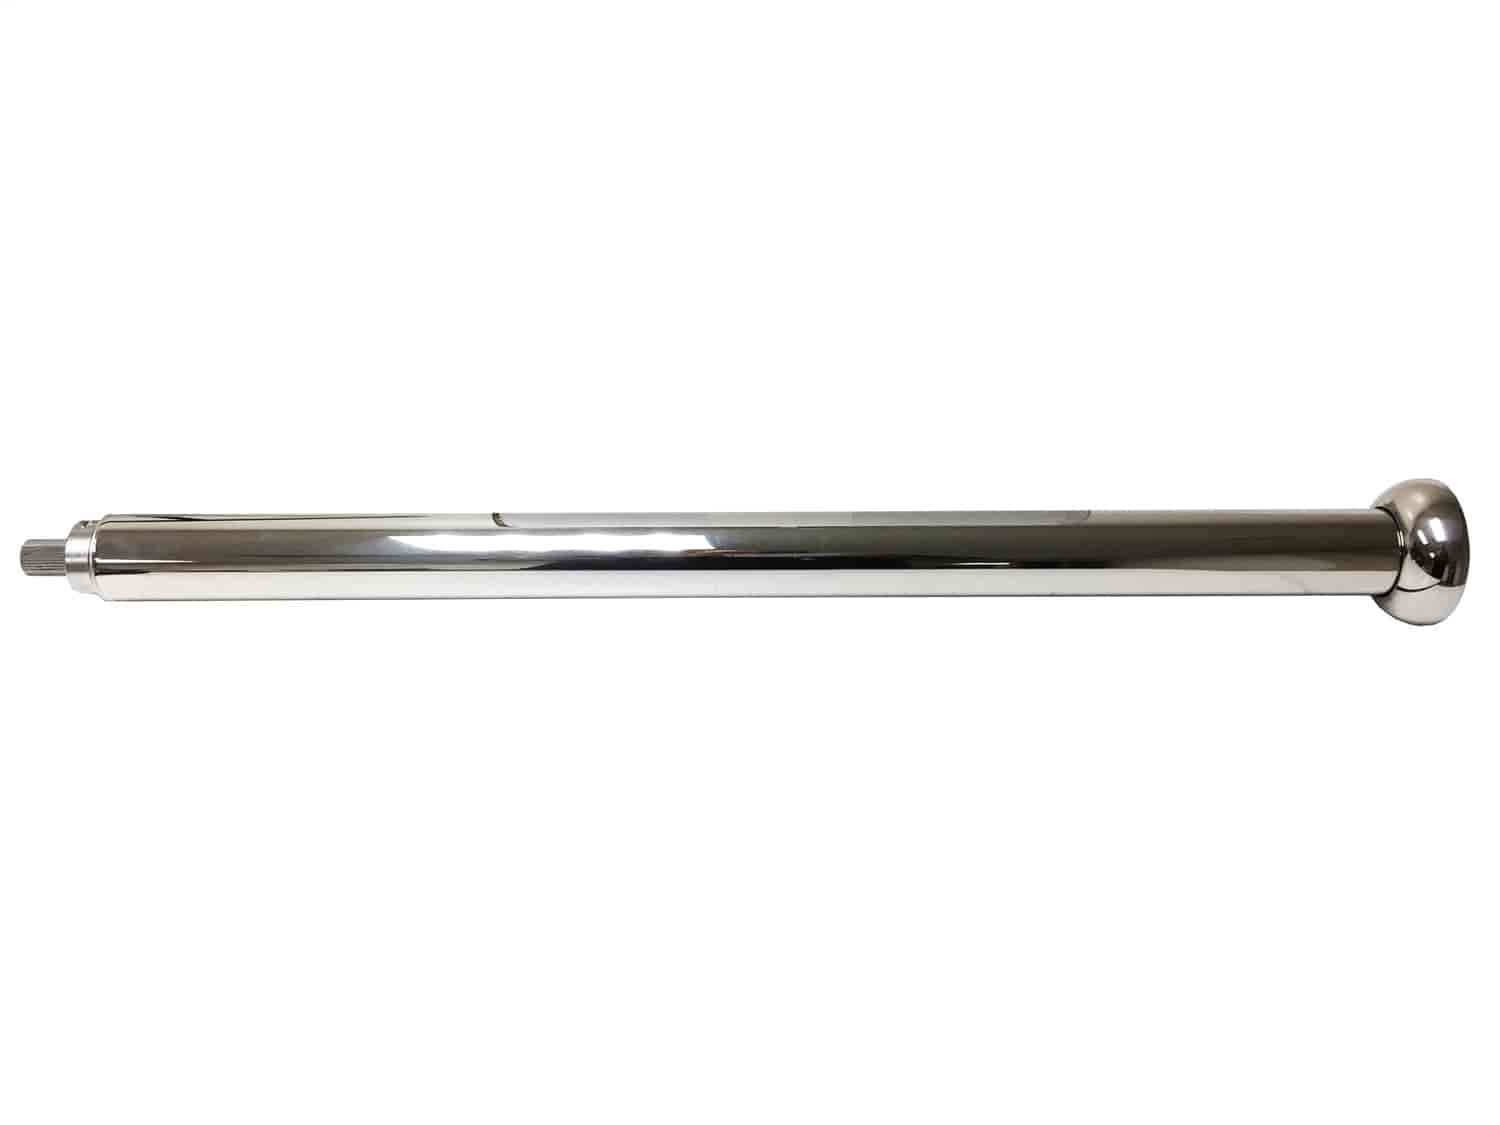 Hot Rod Steering Column 36 in. Length, Polished